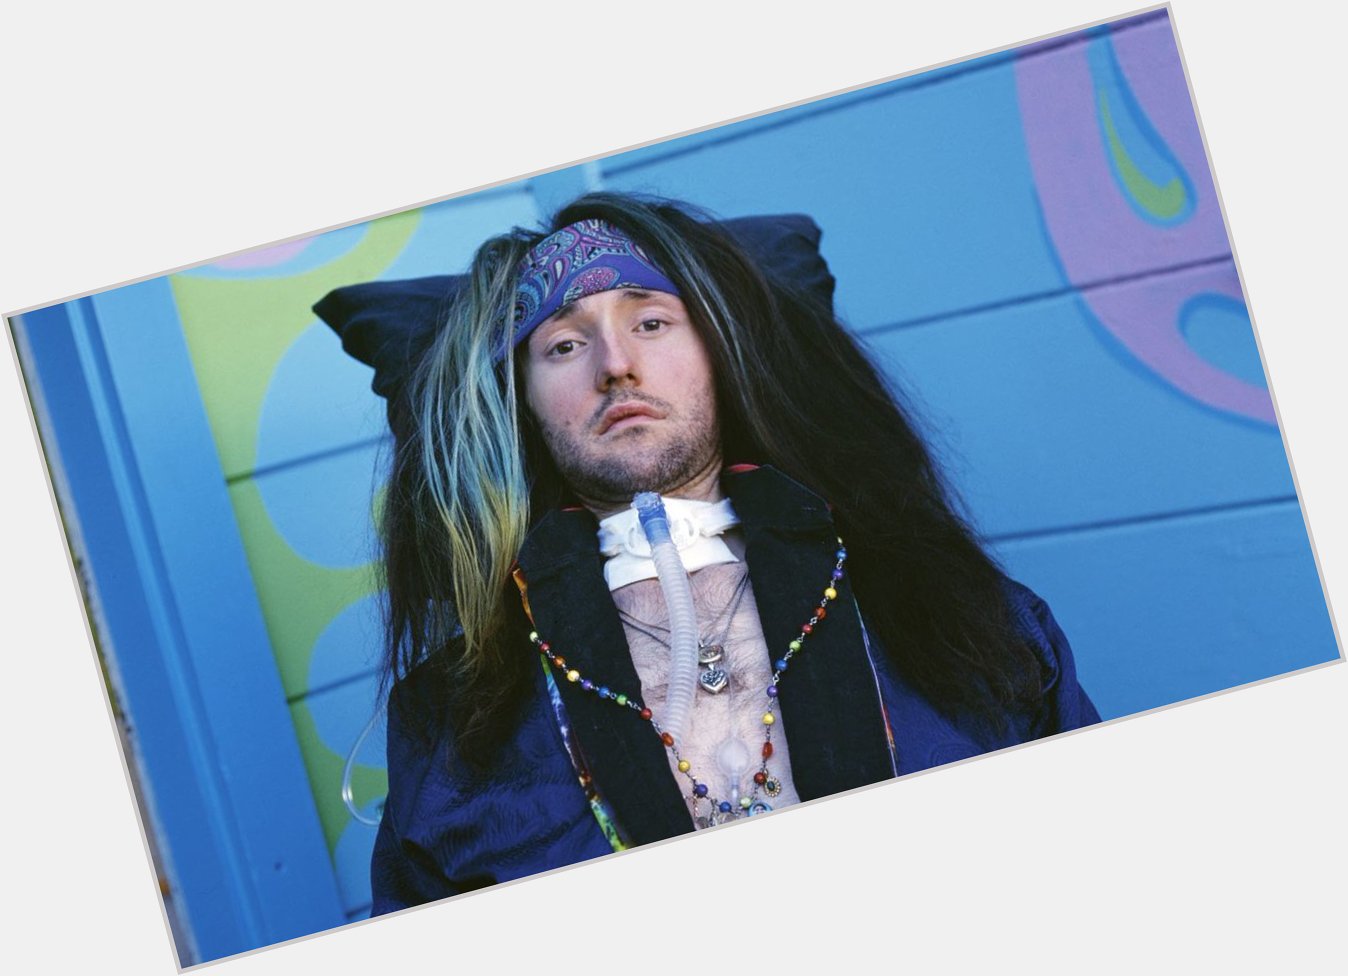 This amazing guitarist is celebrating a birthday today!! HAPPY BIRTHDAY TO THE GREAT JASON BECKER! 